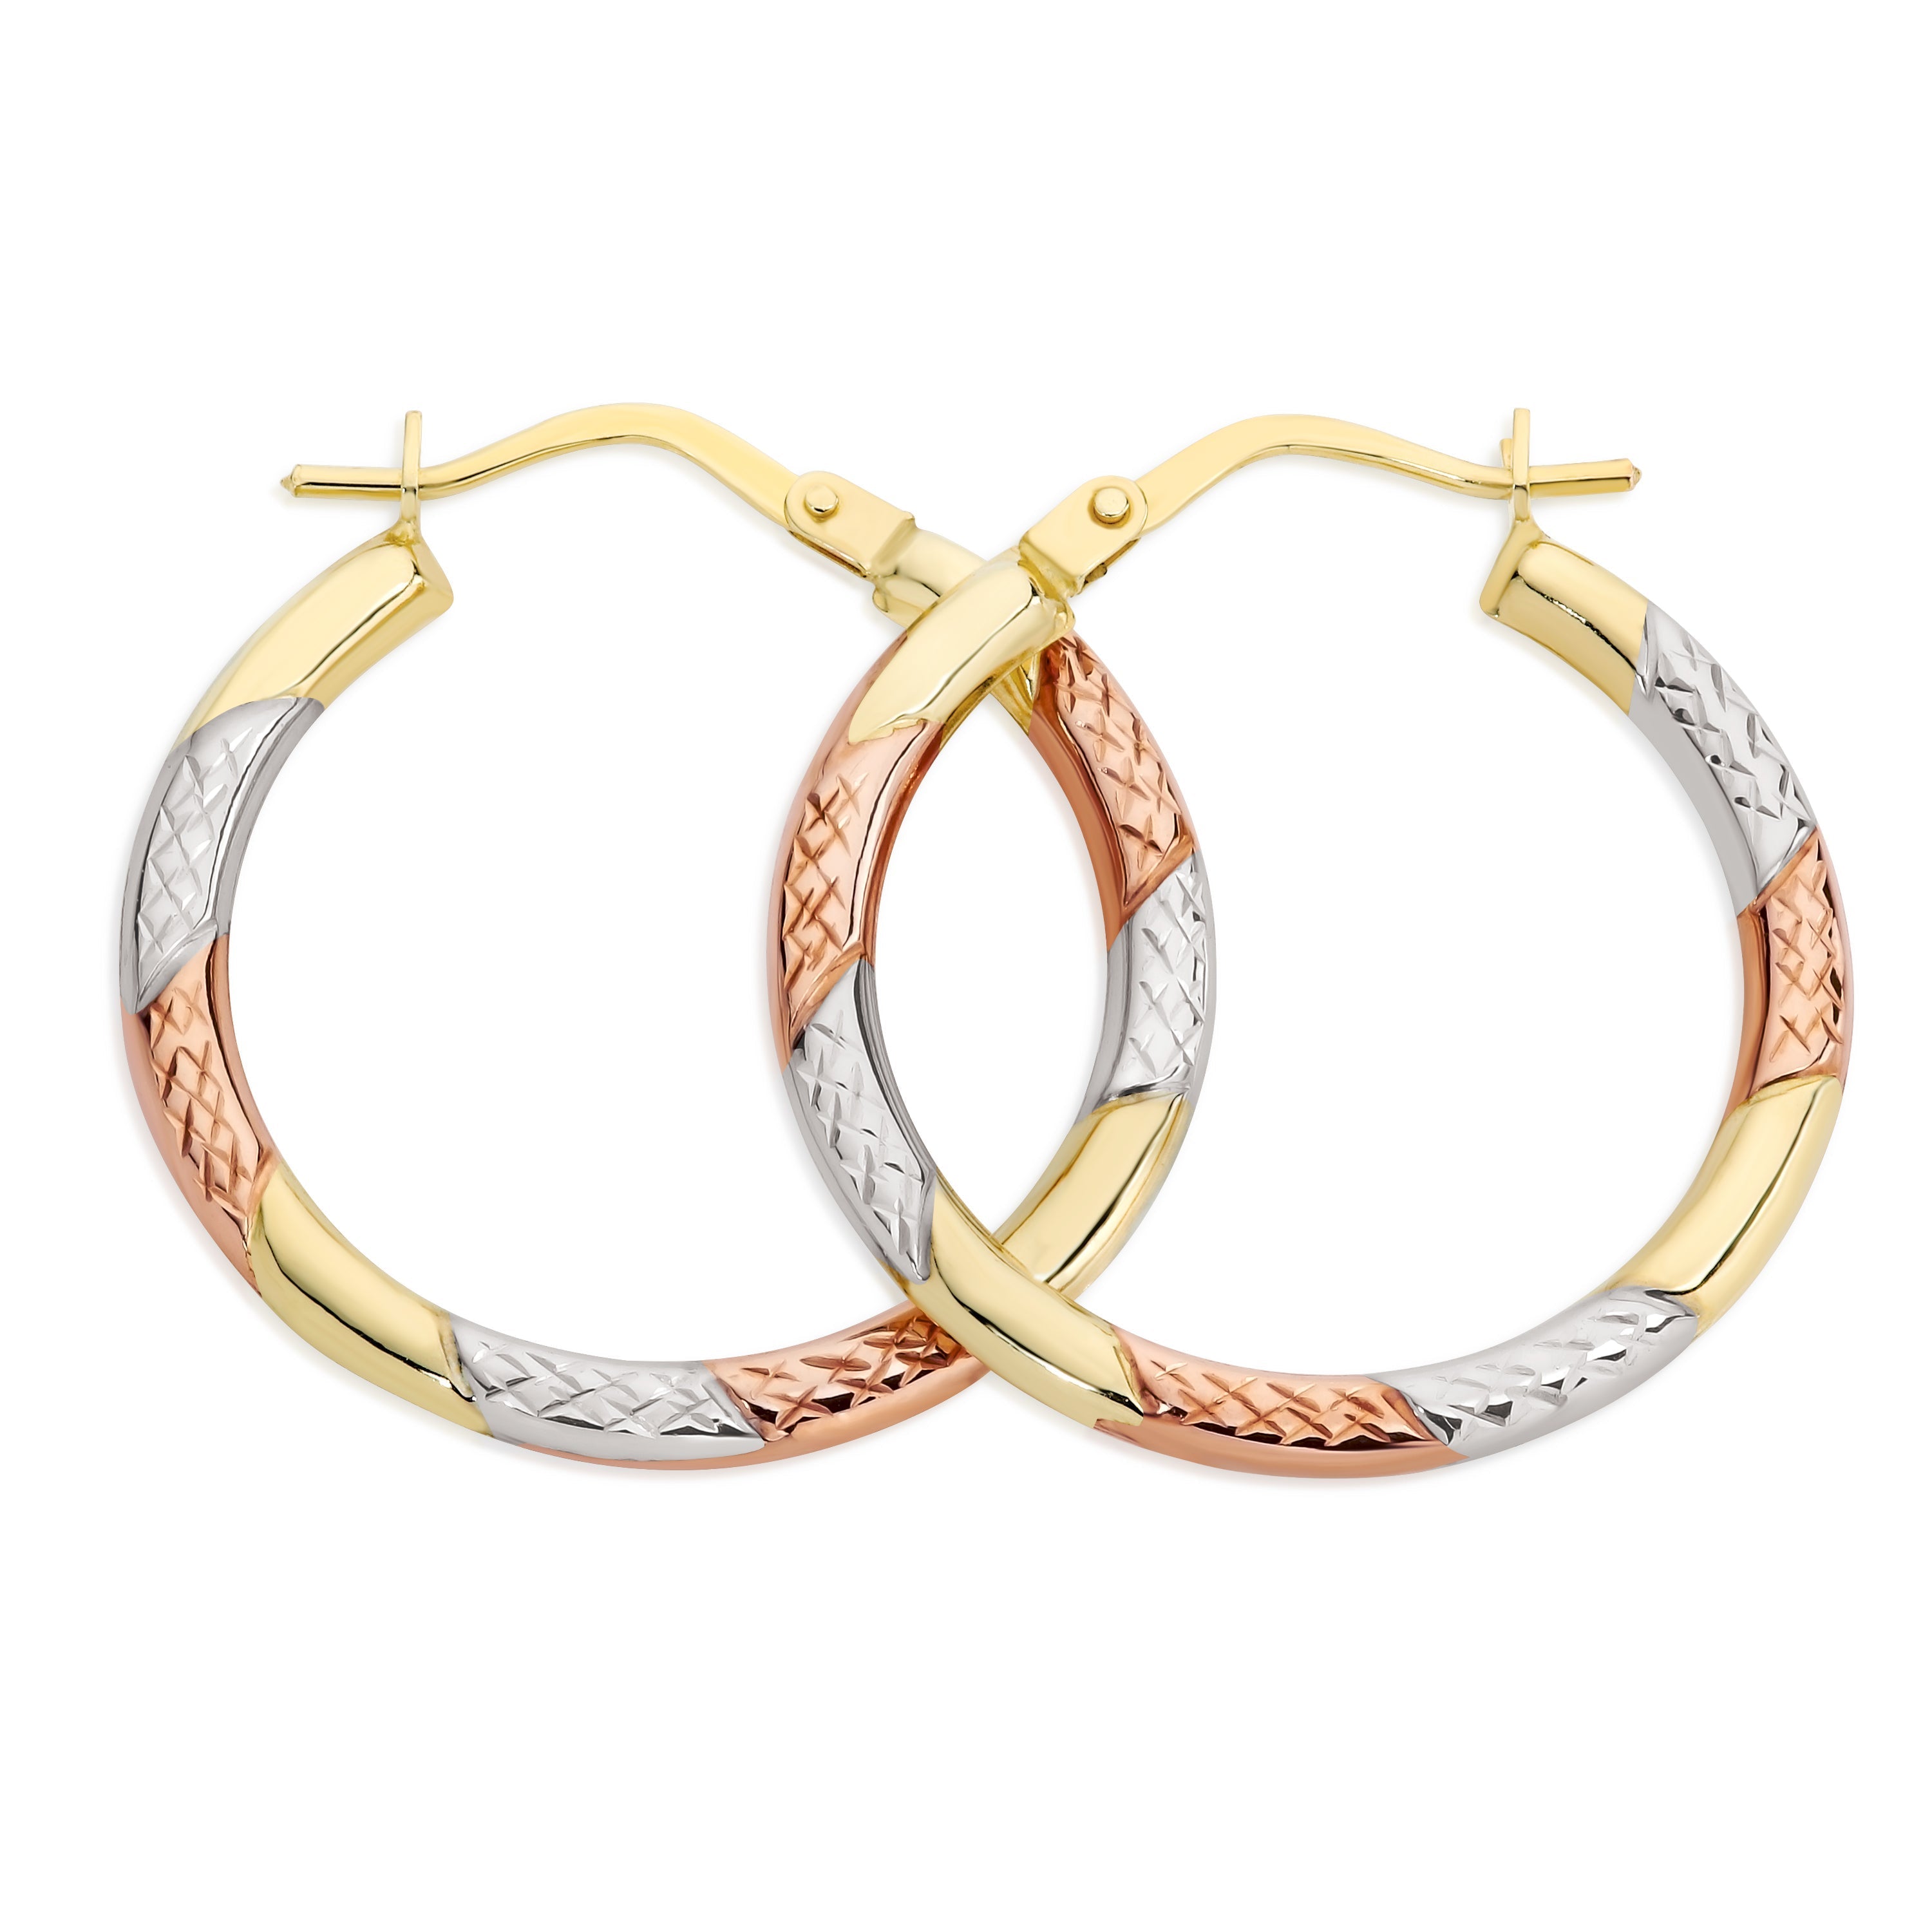 9ct gold 3 tone hoops 20mm